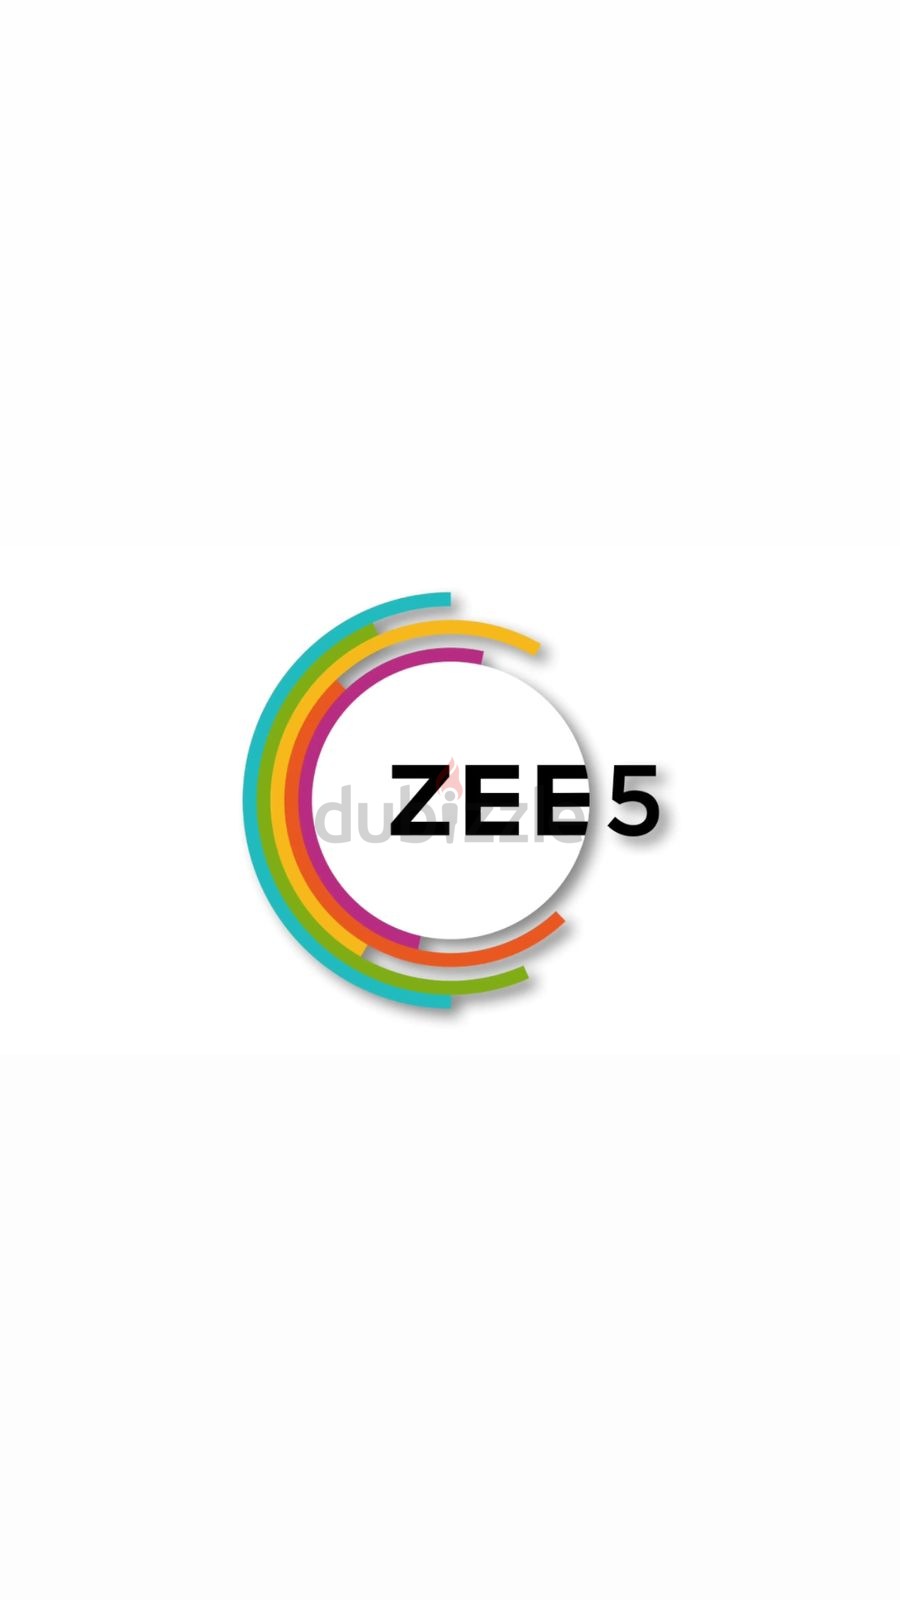 What's New Coming on Zee5, Sony Liv, and Voot in September 2022